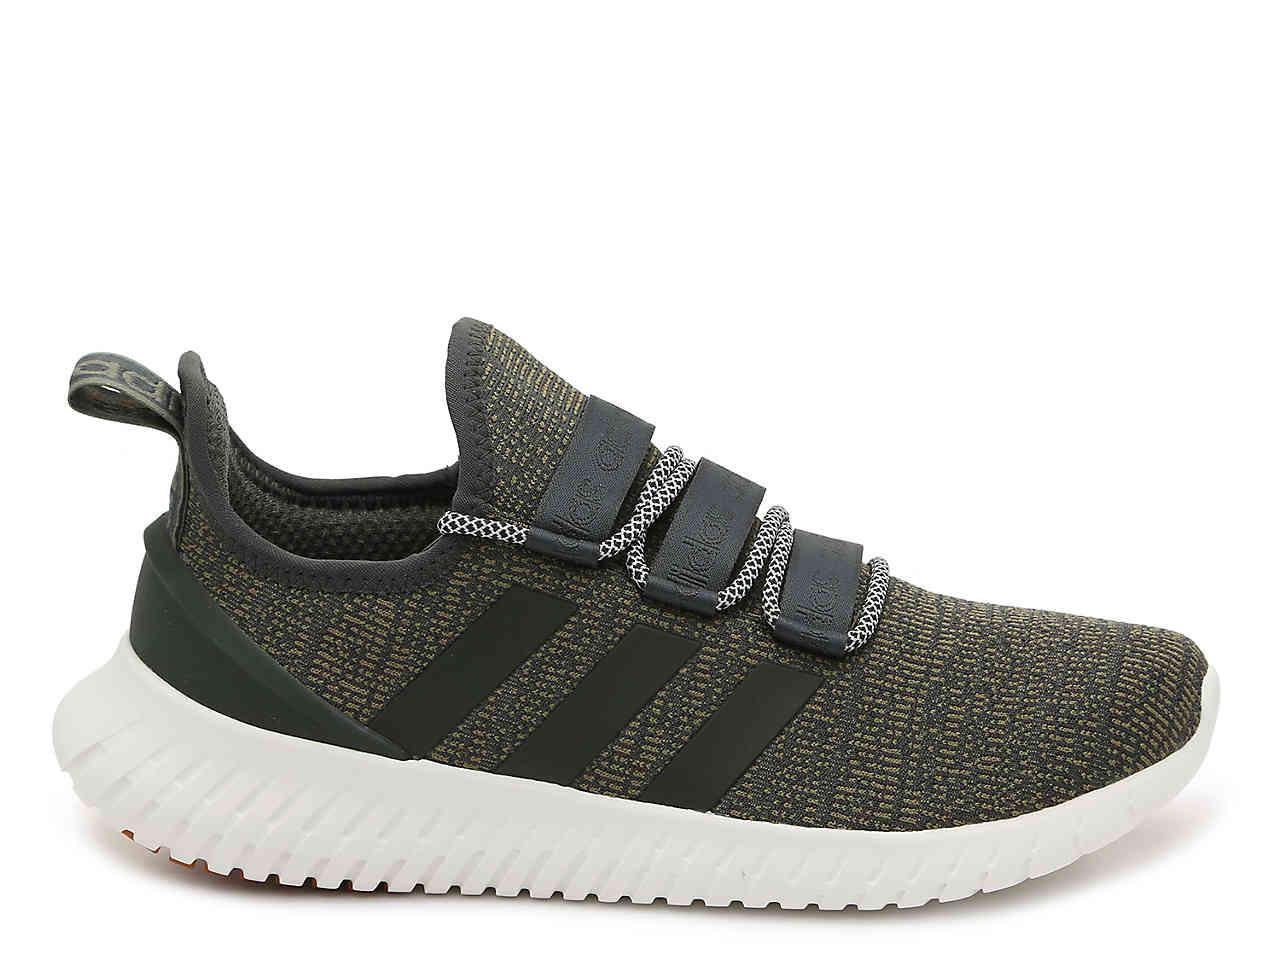 olive green sneakers adidas